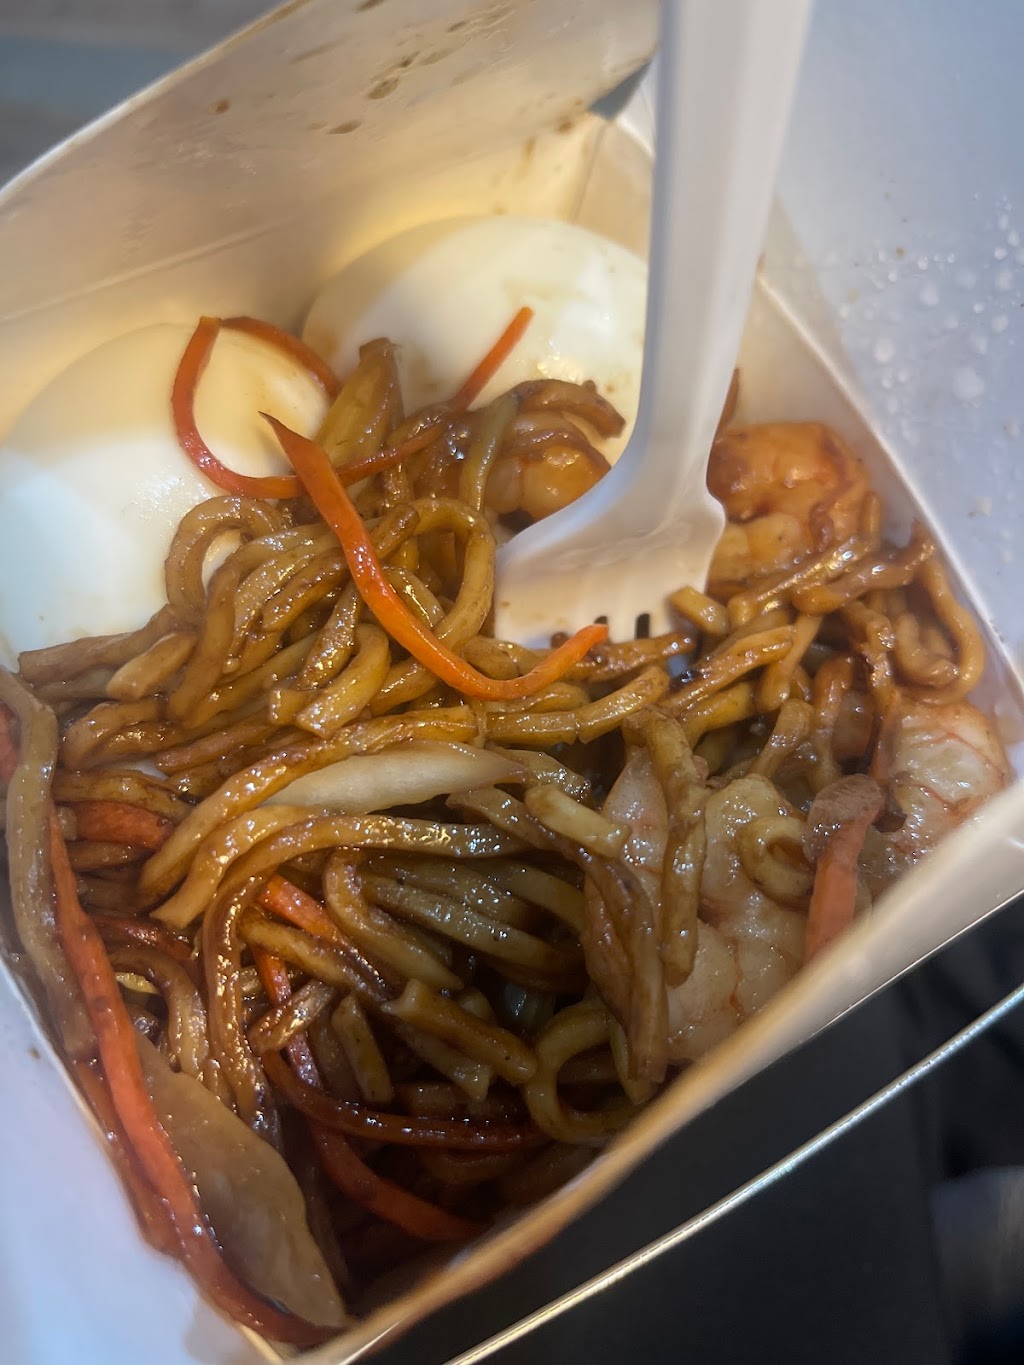 Yuens Chinese Food Carryout | 536 N Chester St, Baltimore, MD 21205, USA | Phone: (410) 327-2225